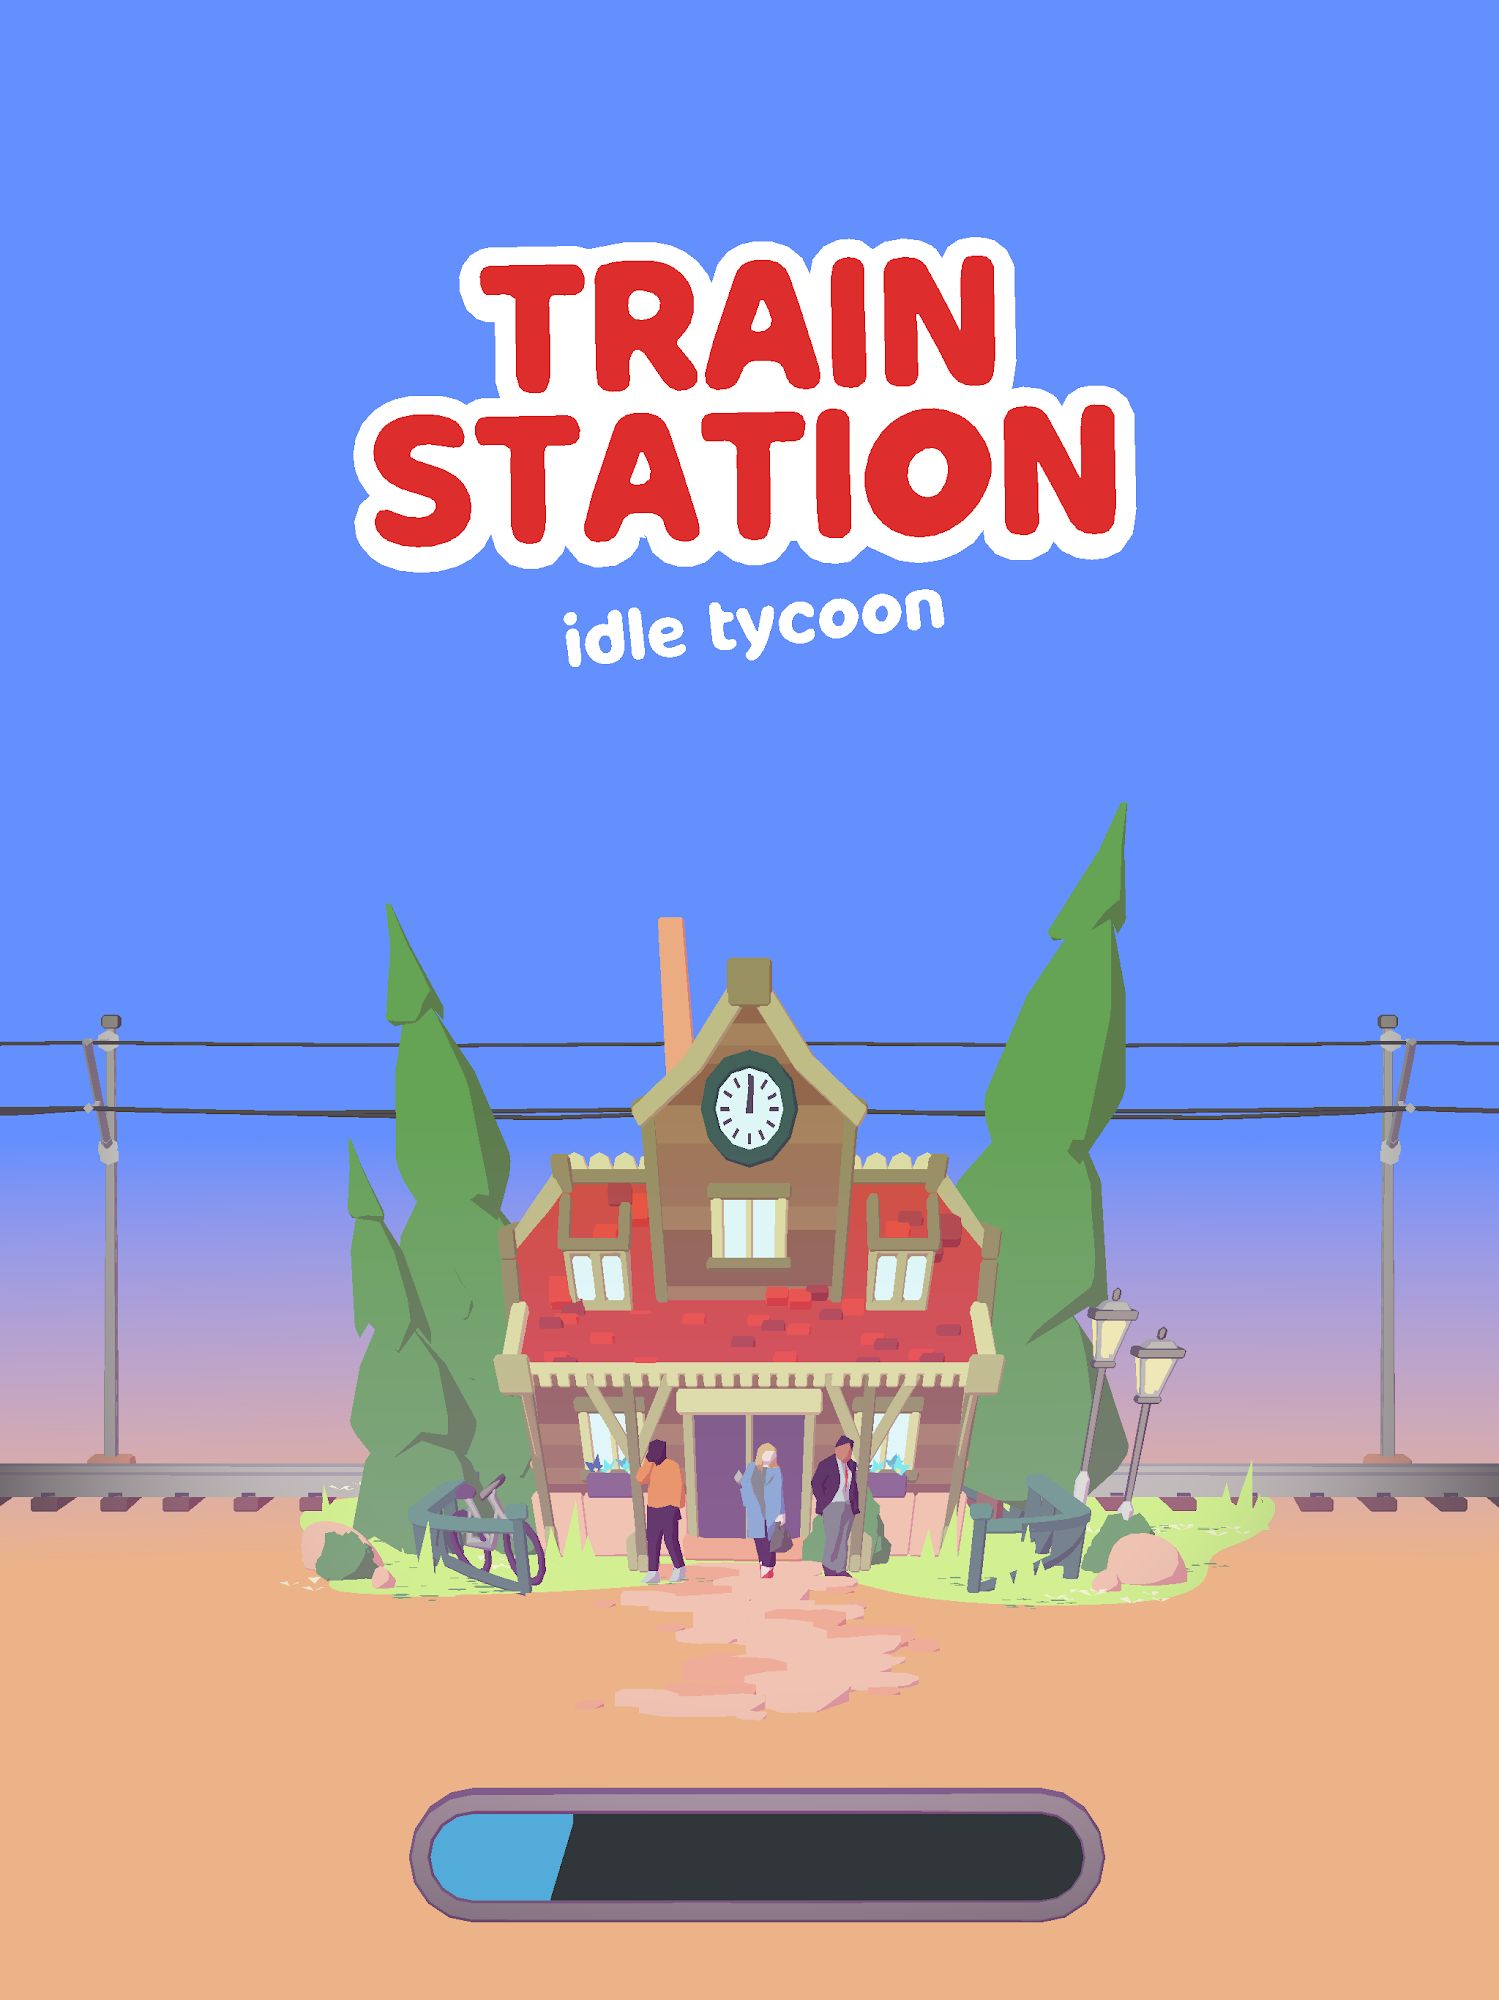 Idle Train Station Tycoon. Train Tycoon на андроид. Игра Idle Train. Idle Train Station Tycoon Android.